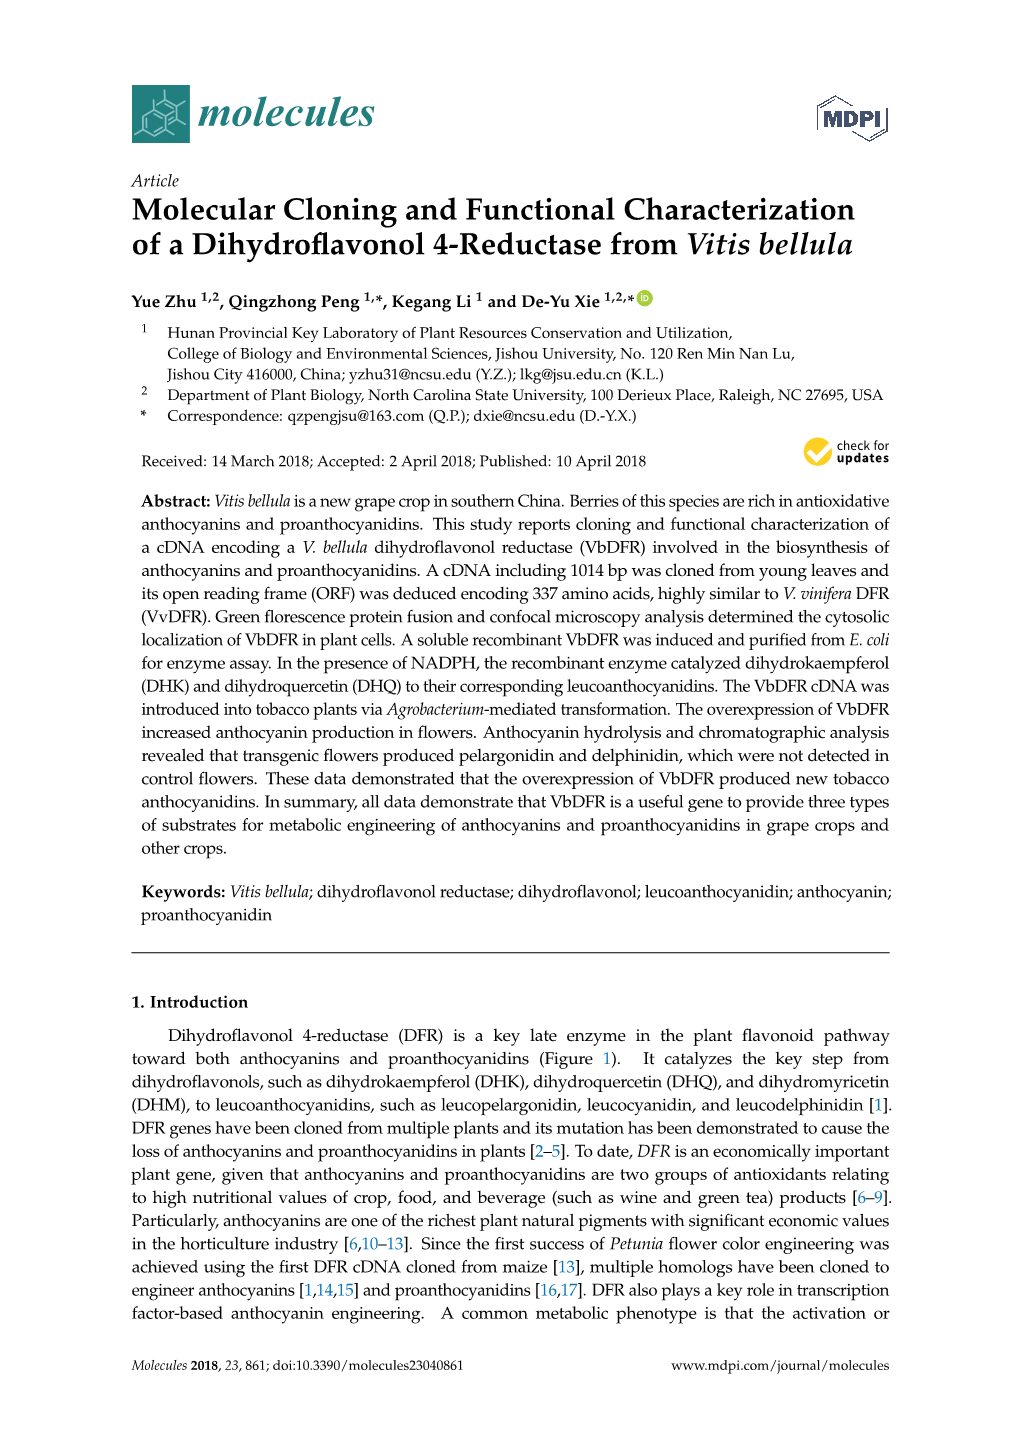 Molecular Cloning and Functional Characterization of a Dihydroﬂavonol 4-Reductase from Vitis Bellula